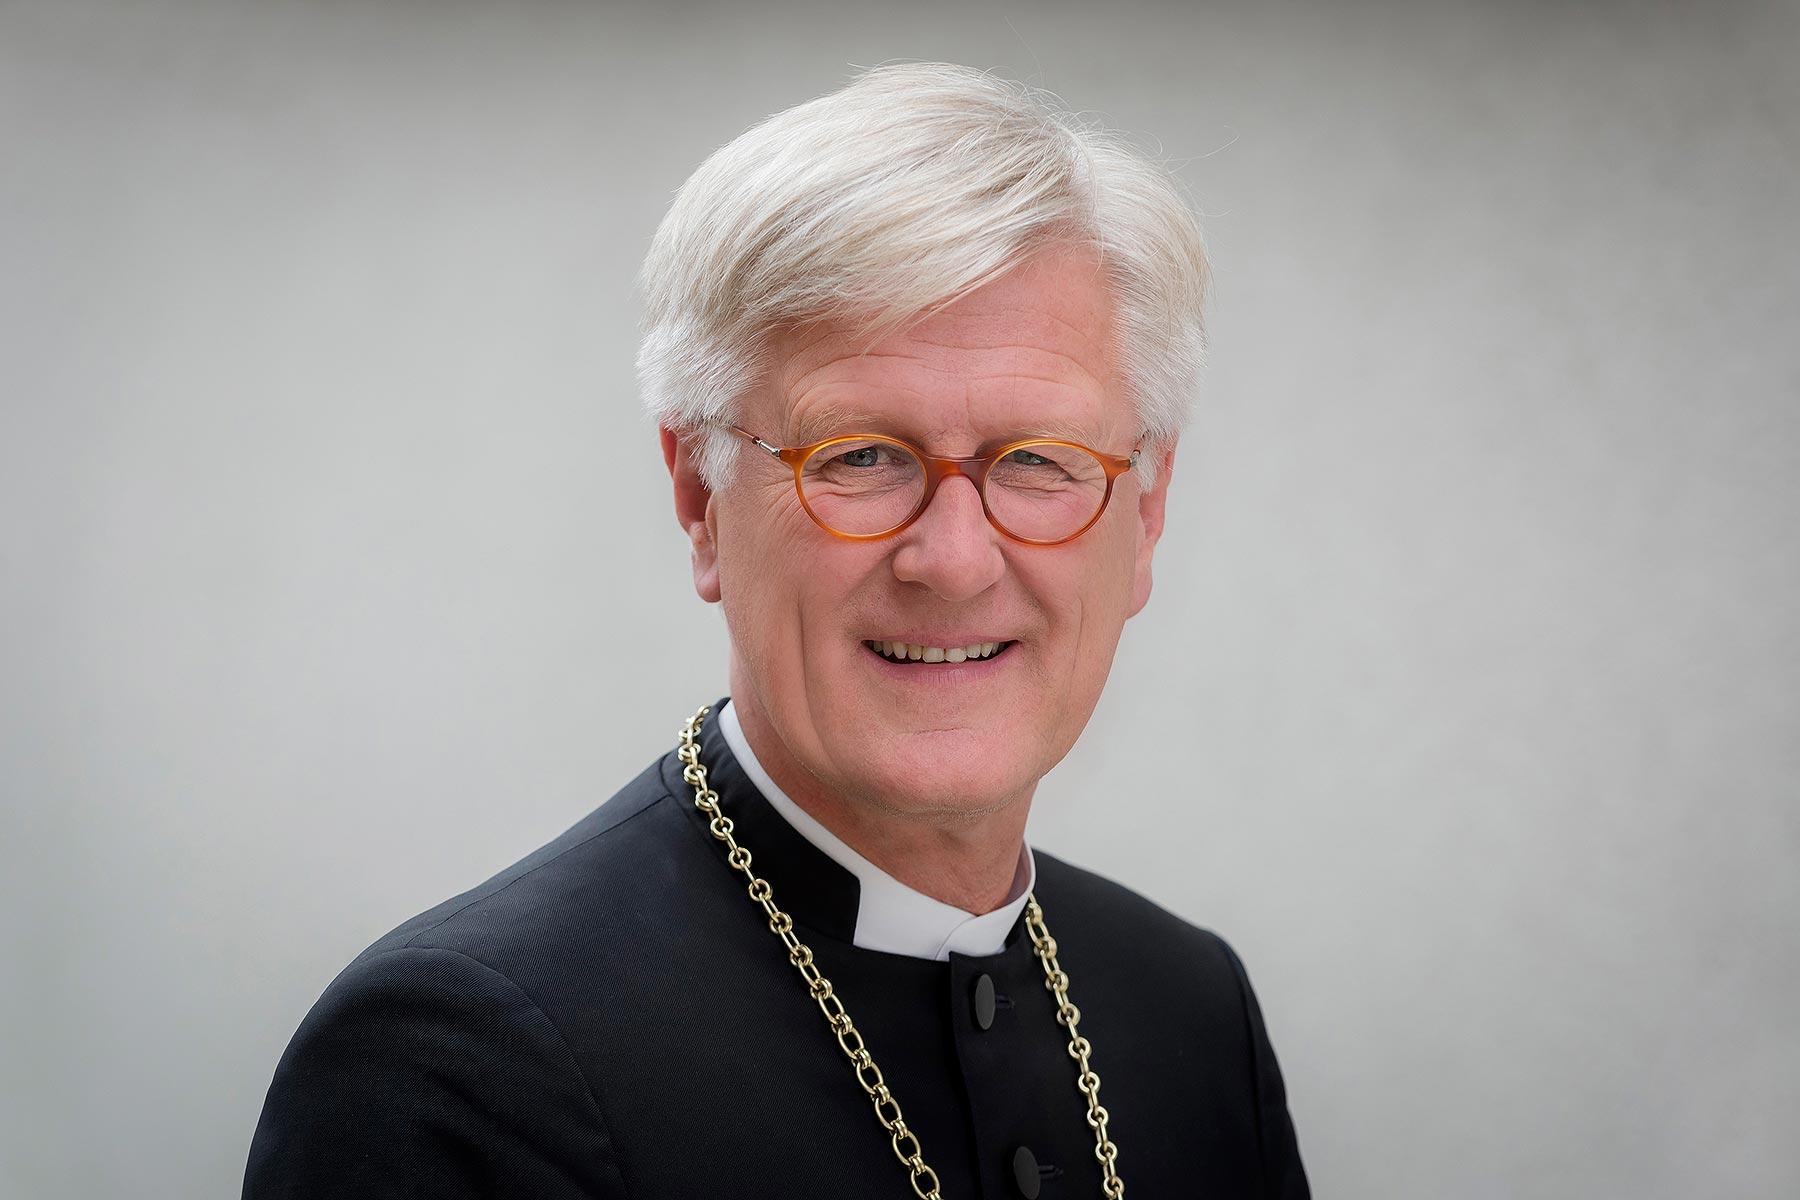 Heinrich Bedford-Strohm, Chair of the Council of the EKD and Bishop of the Evangelical Lutheran Church in Bavaria, receives death threats for his stand on the sea rescue of refugees in the Mediterranean. Photo: ELKB/Rost